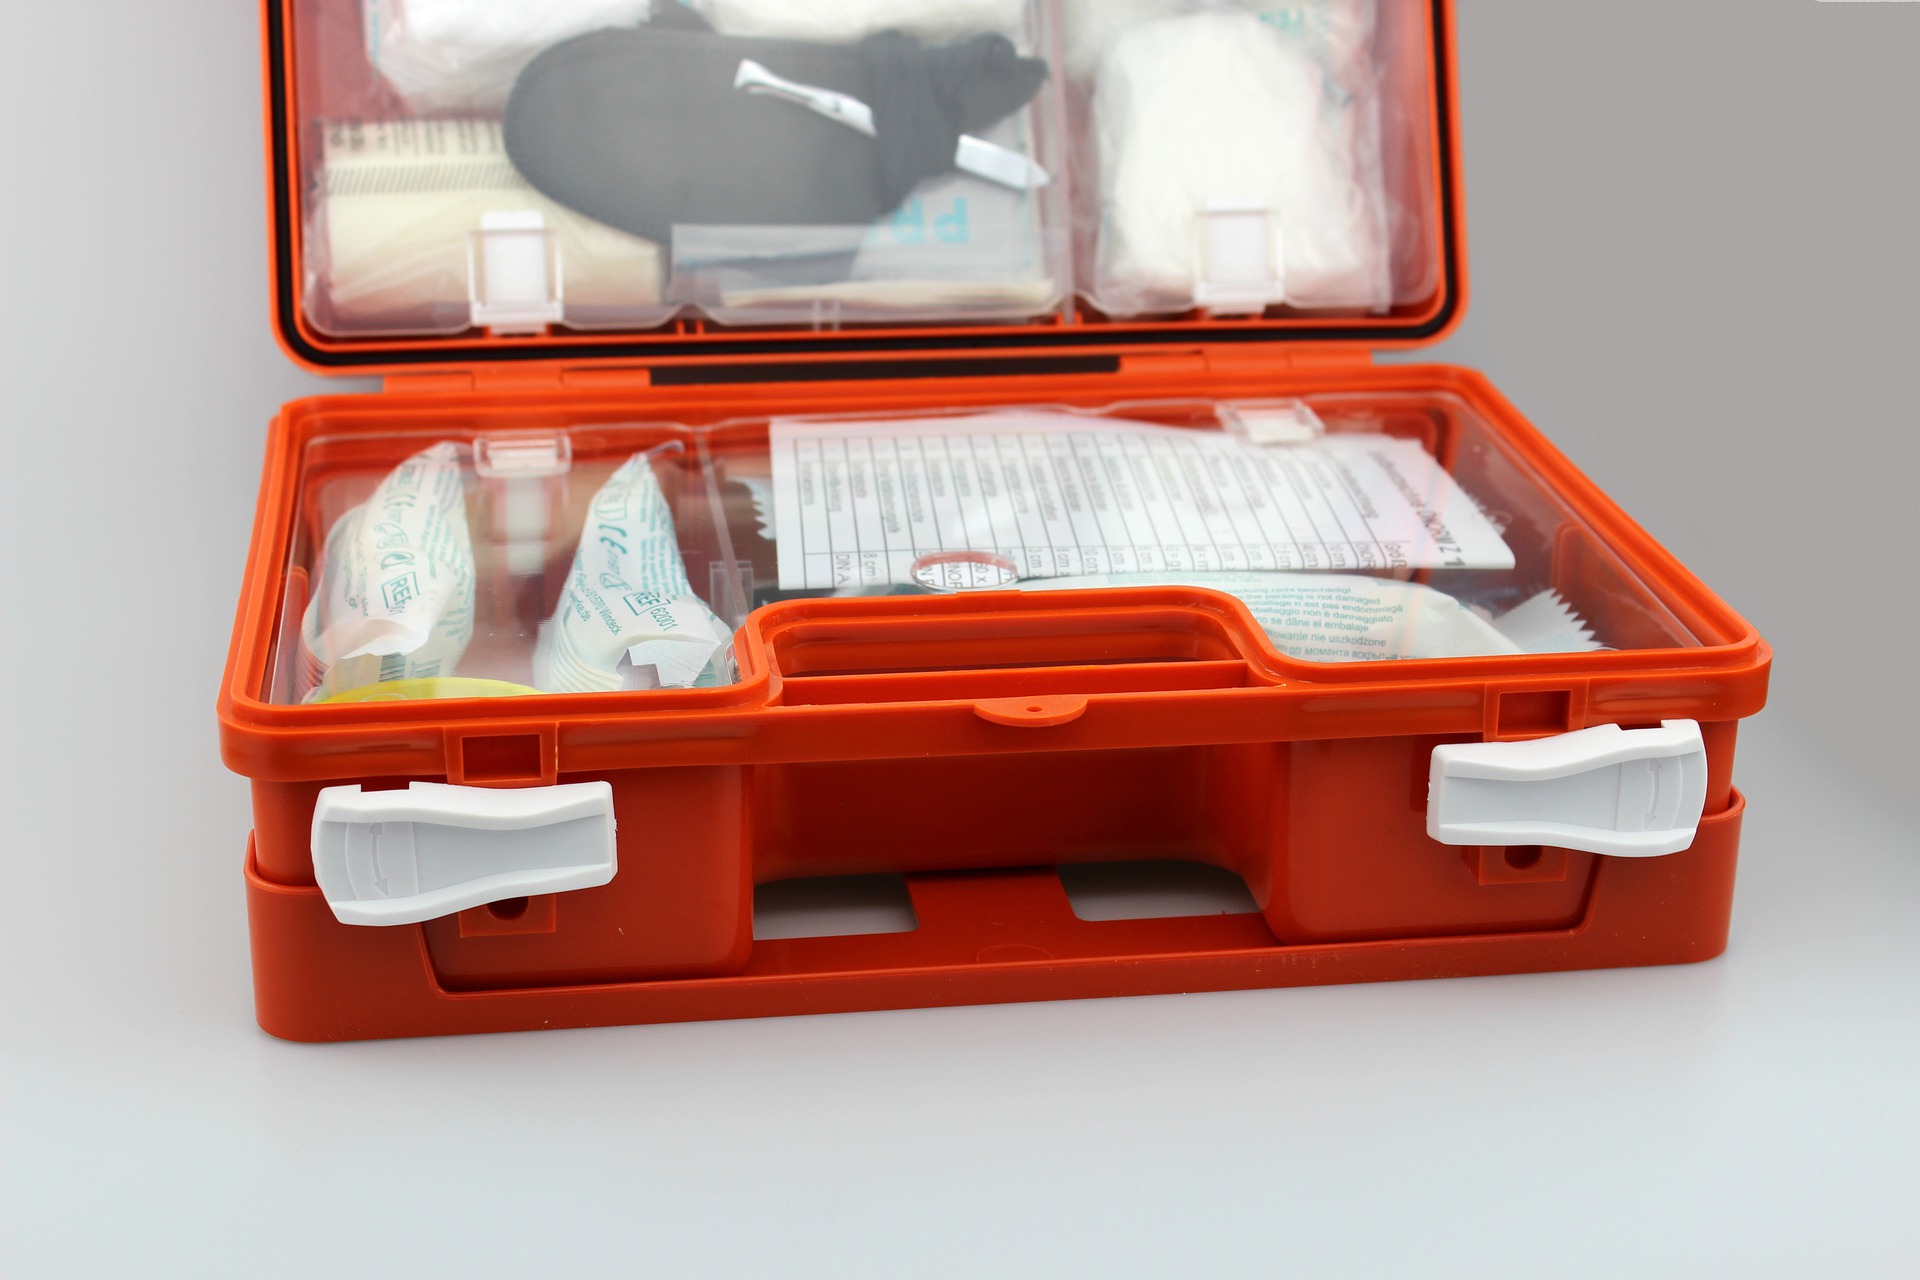 first-aid-kit-4535156_1920